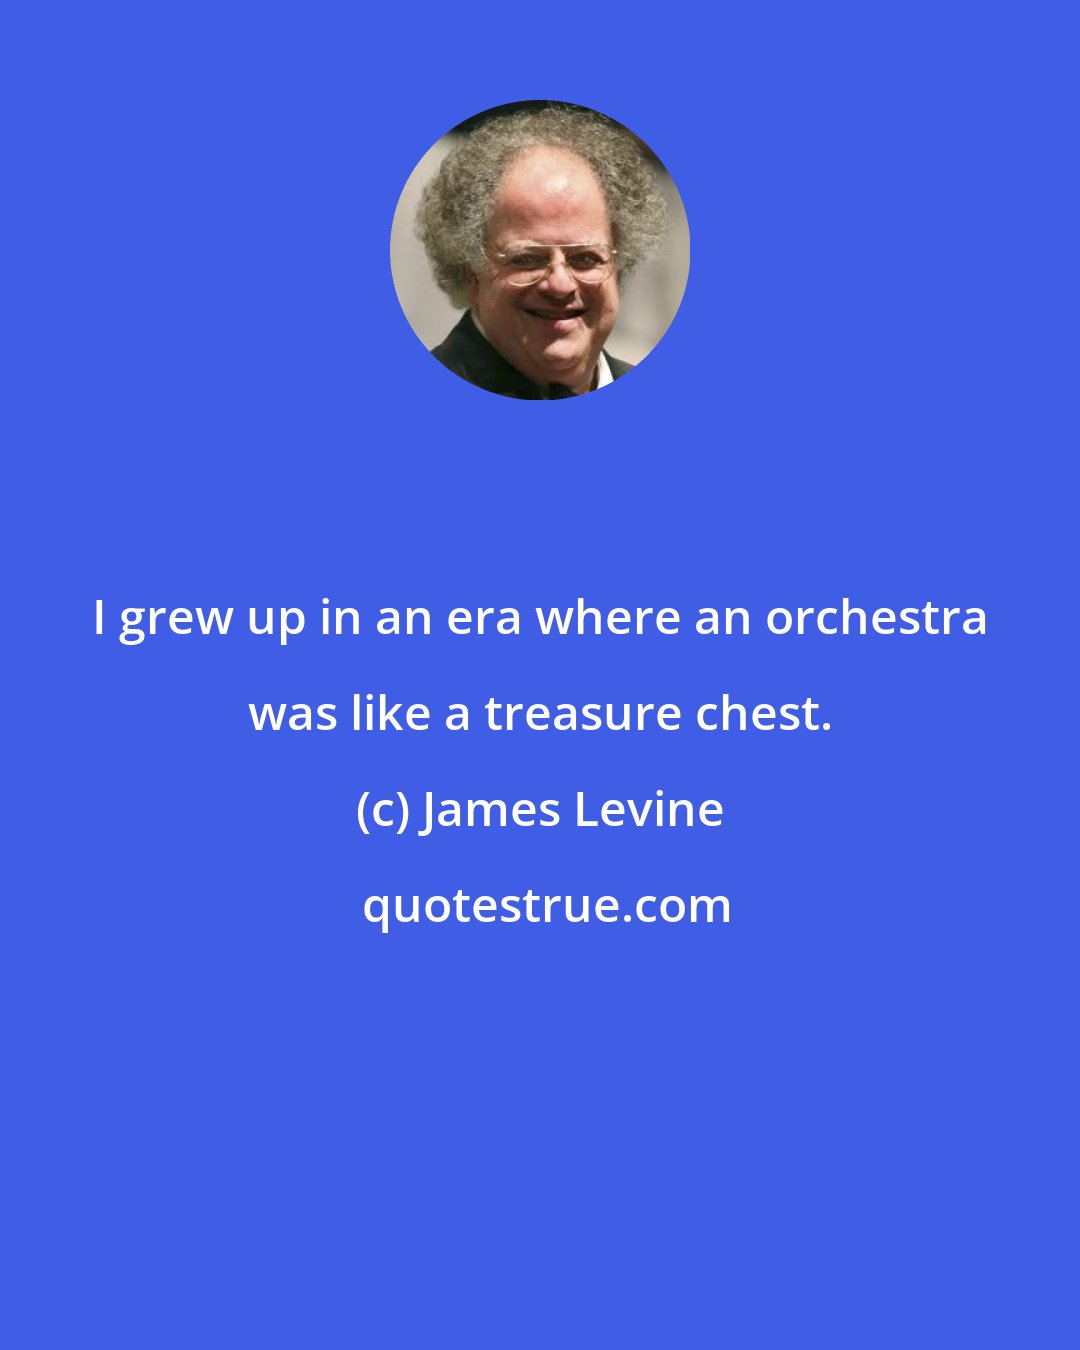 James Levine: I grew up in an era where an orchestra was like a treasure chest.